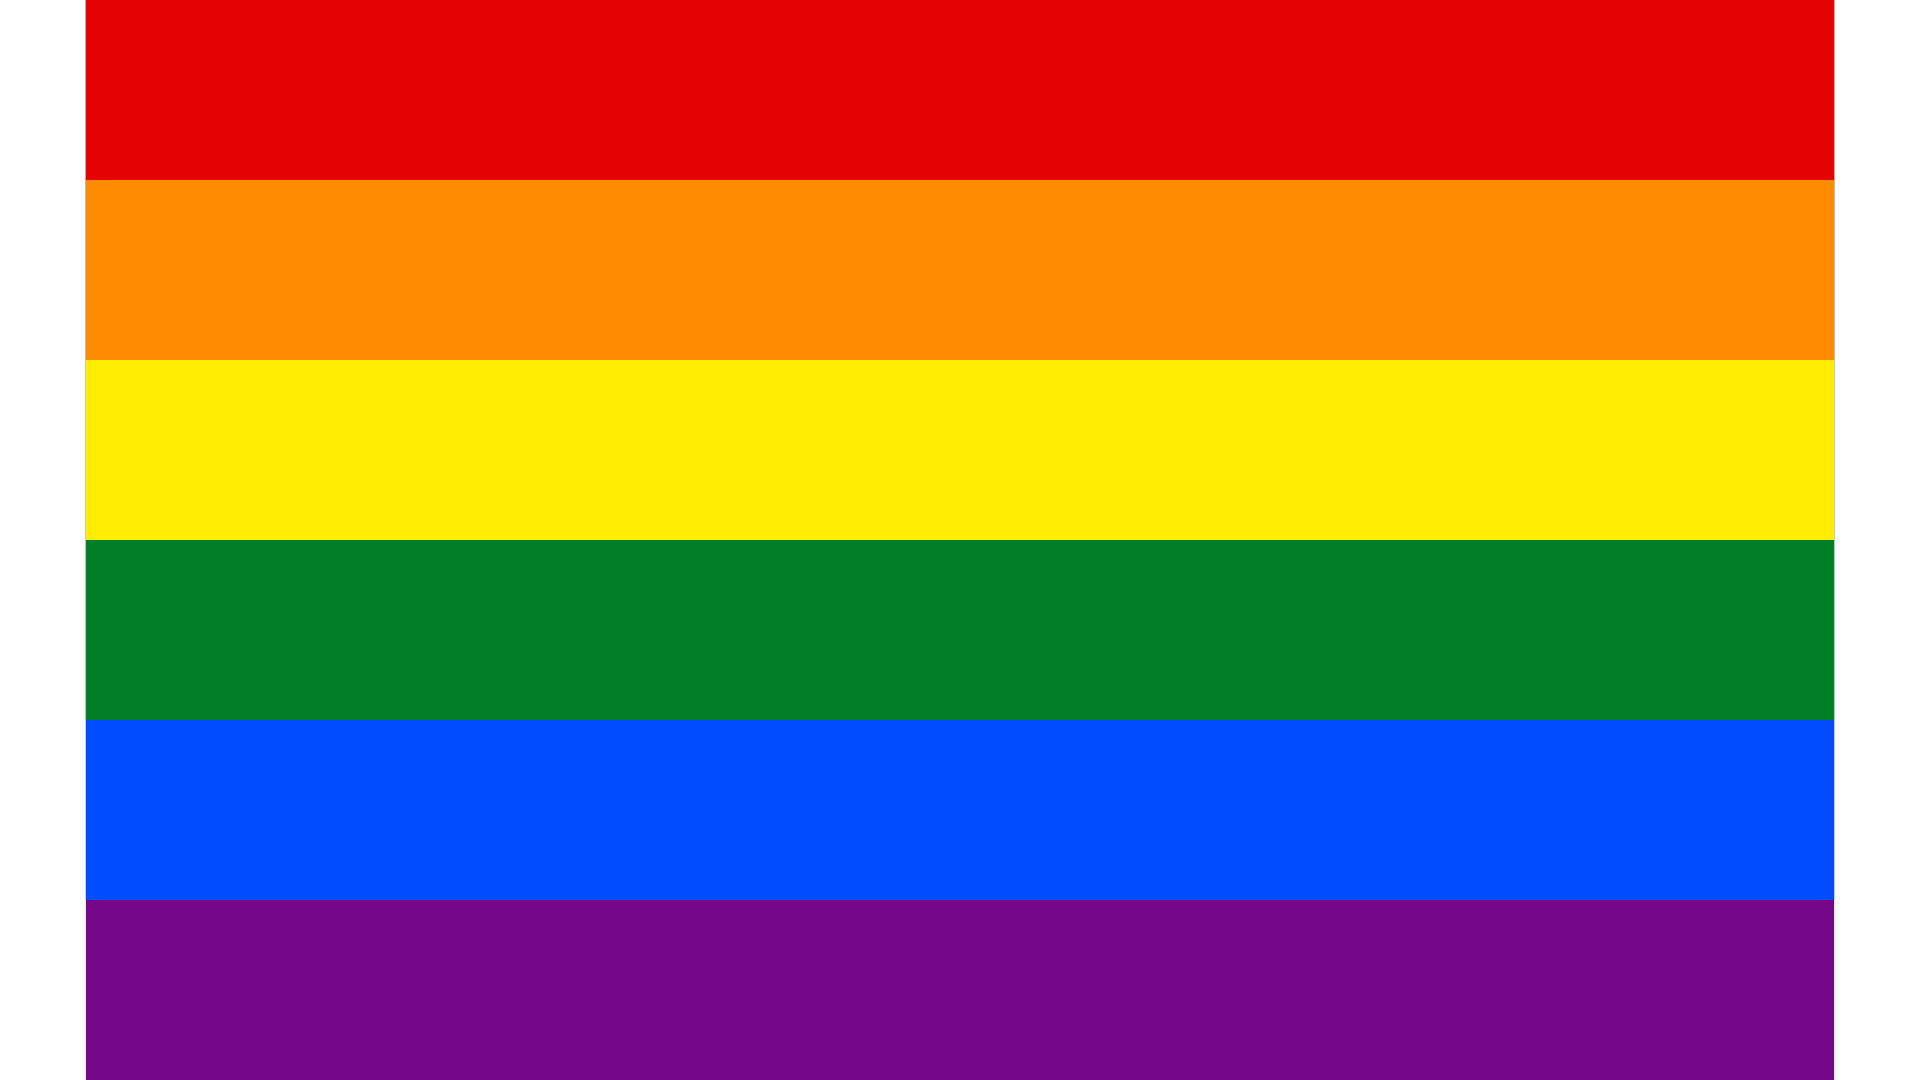 history of the gay pride flag